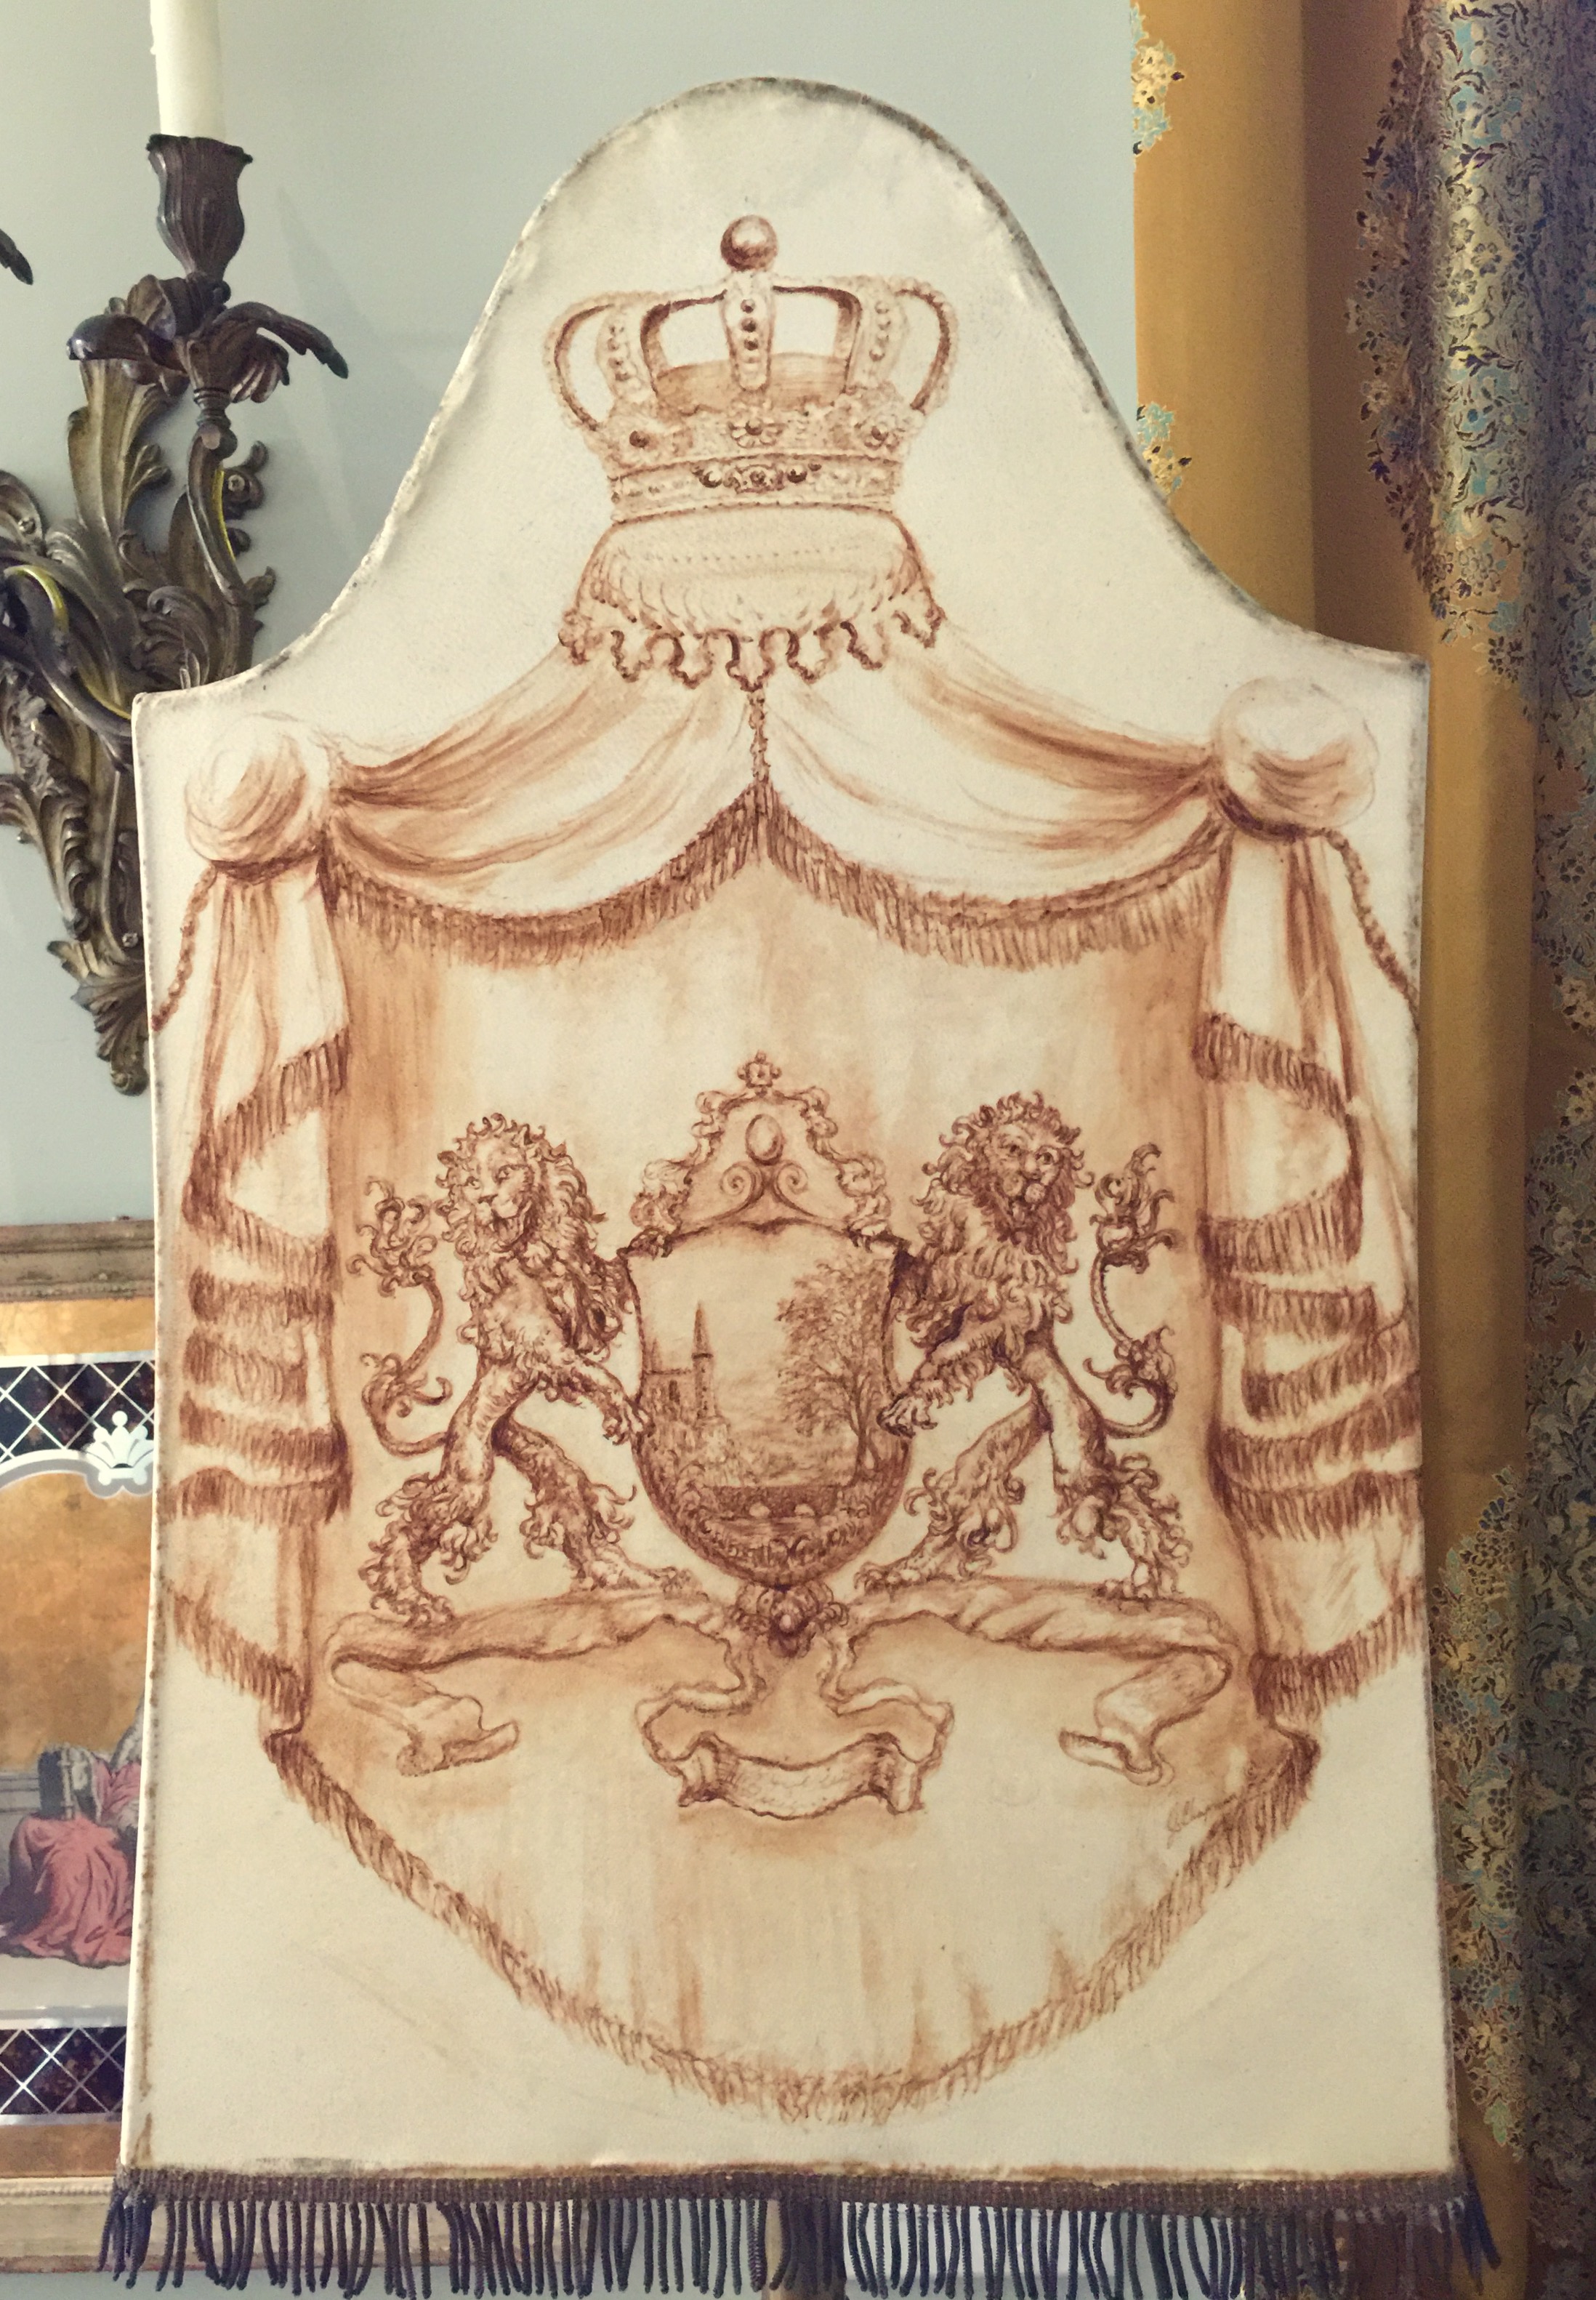 Family Crest Lampshade from the Masterpiece Collection by Jennifer Chapman